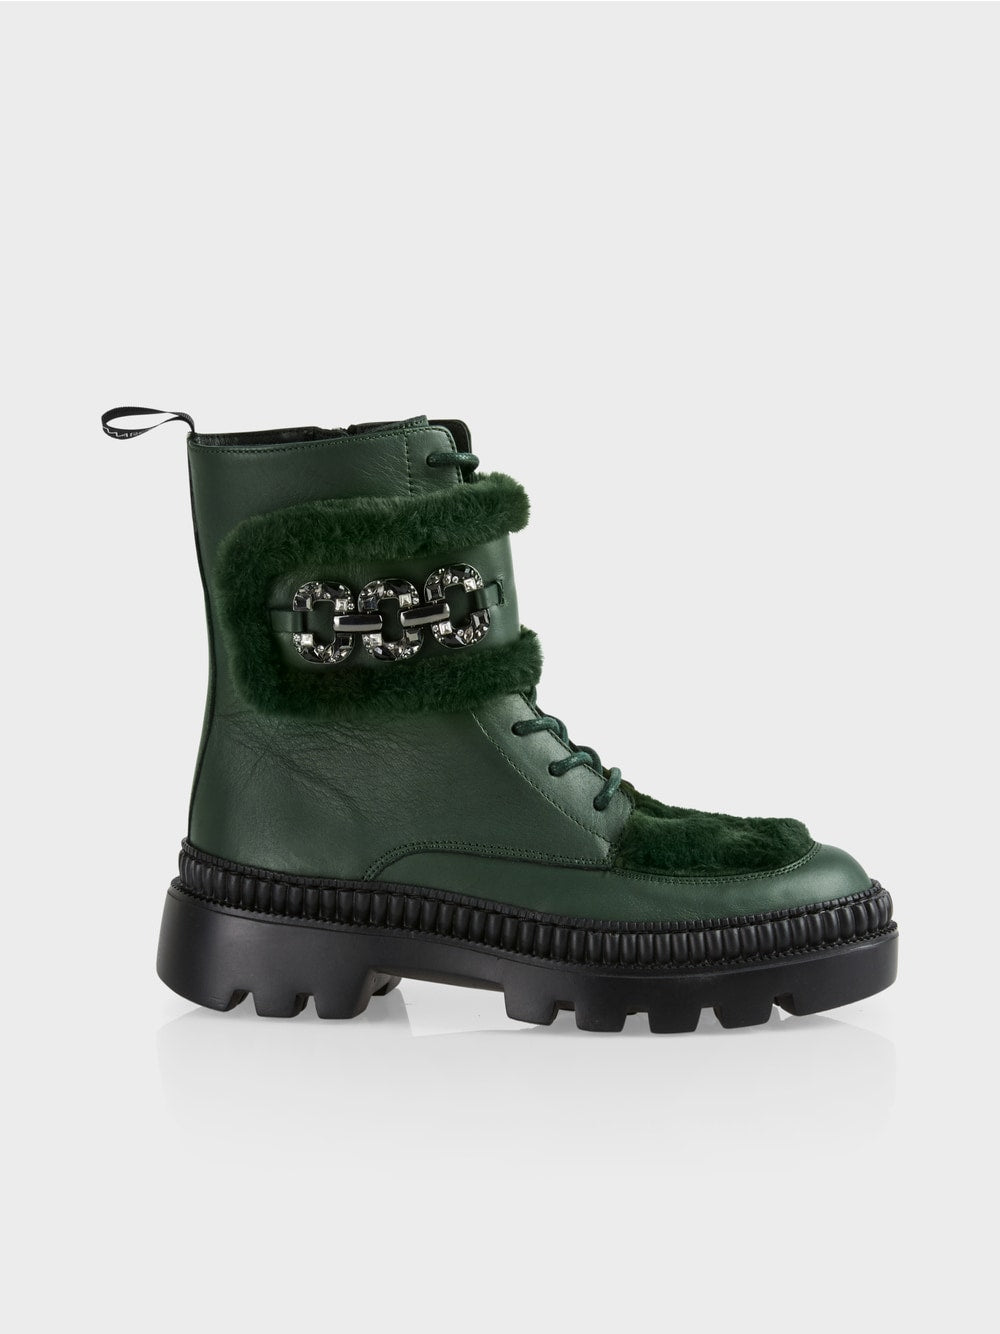 Marc Cain Green Lace up boots with Fun Fur